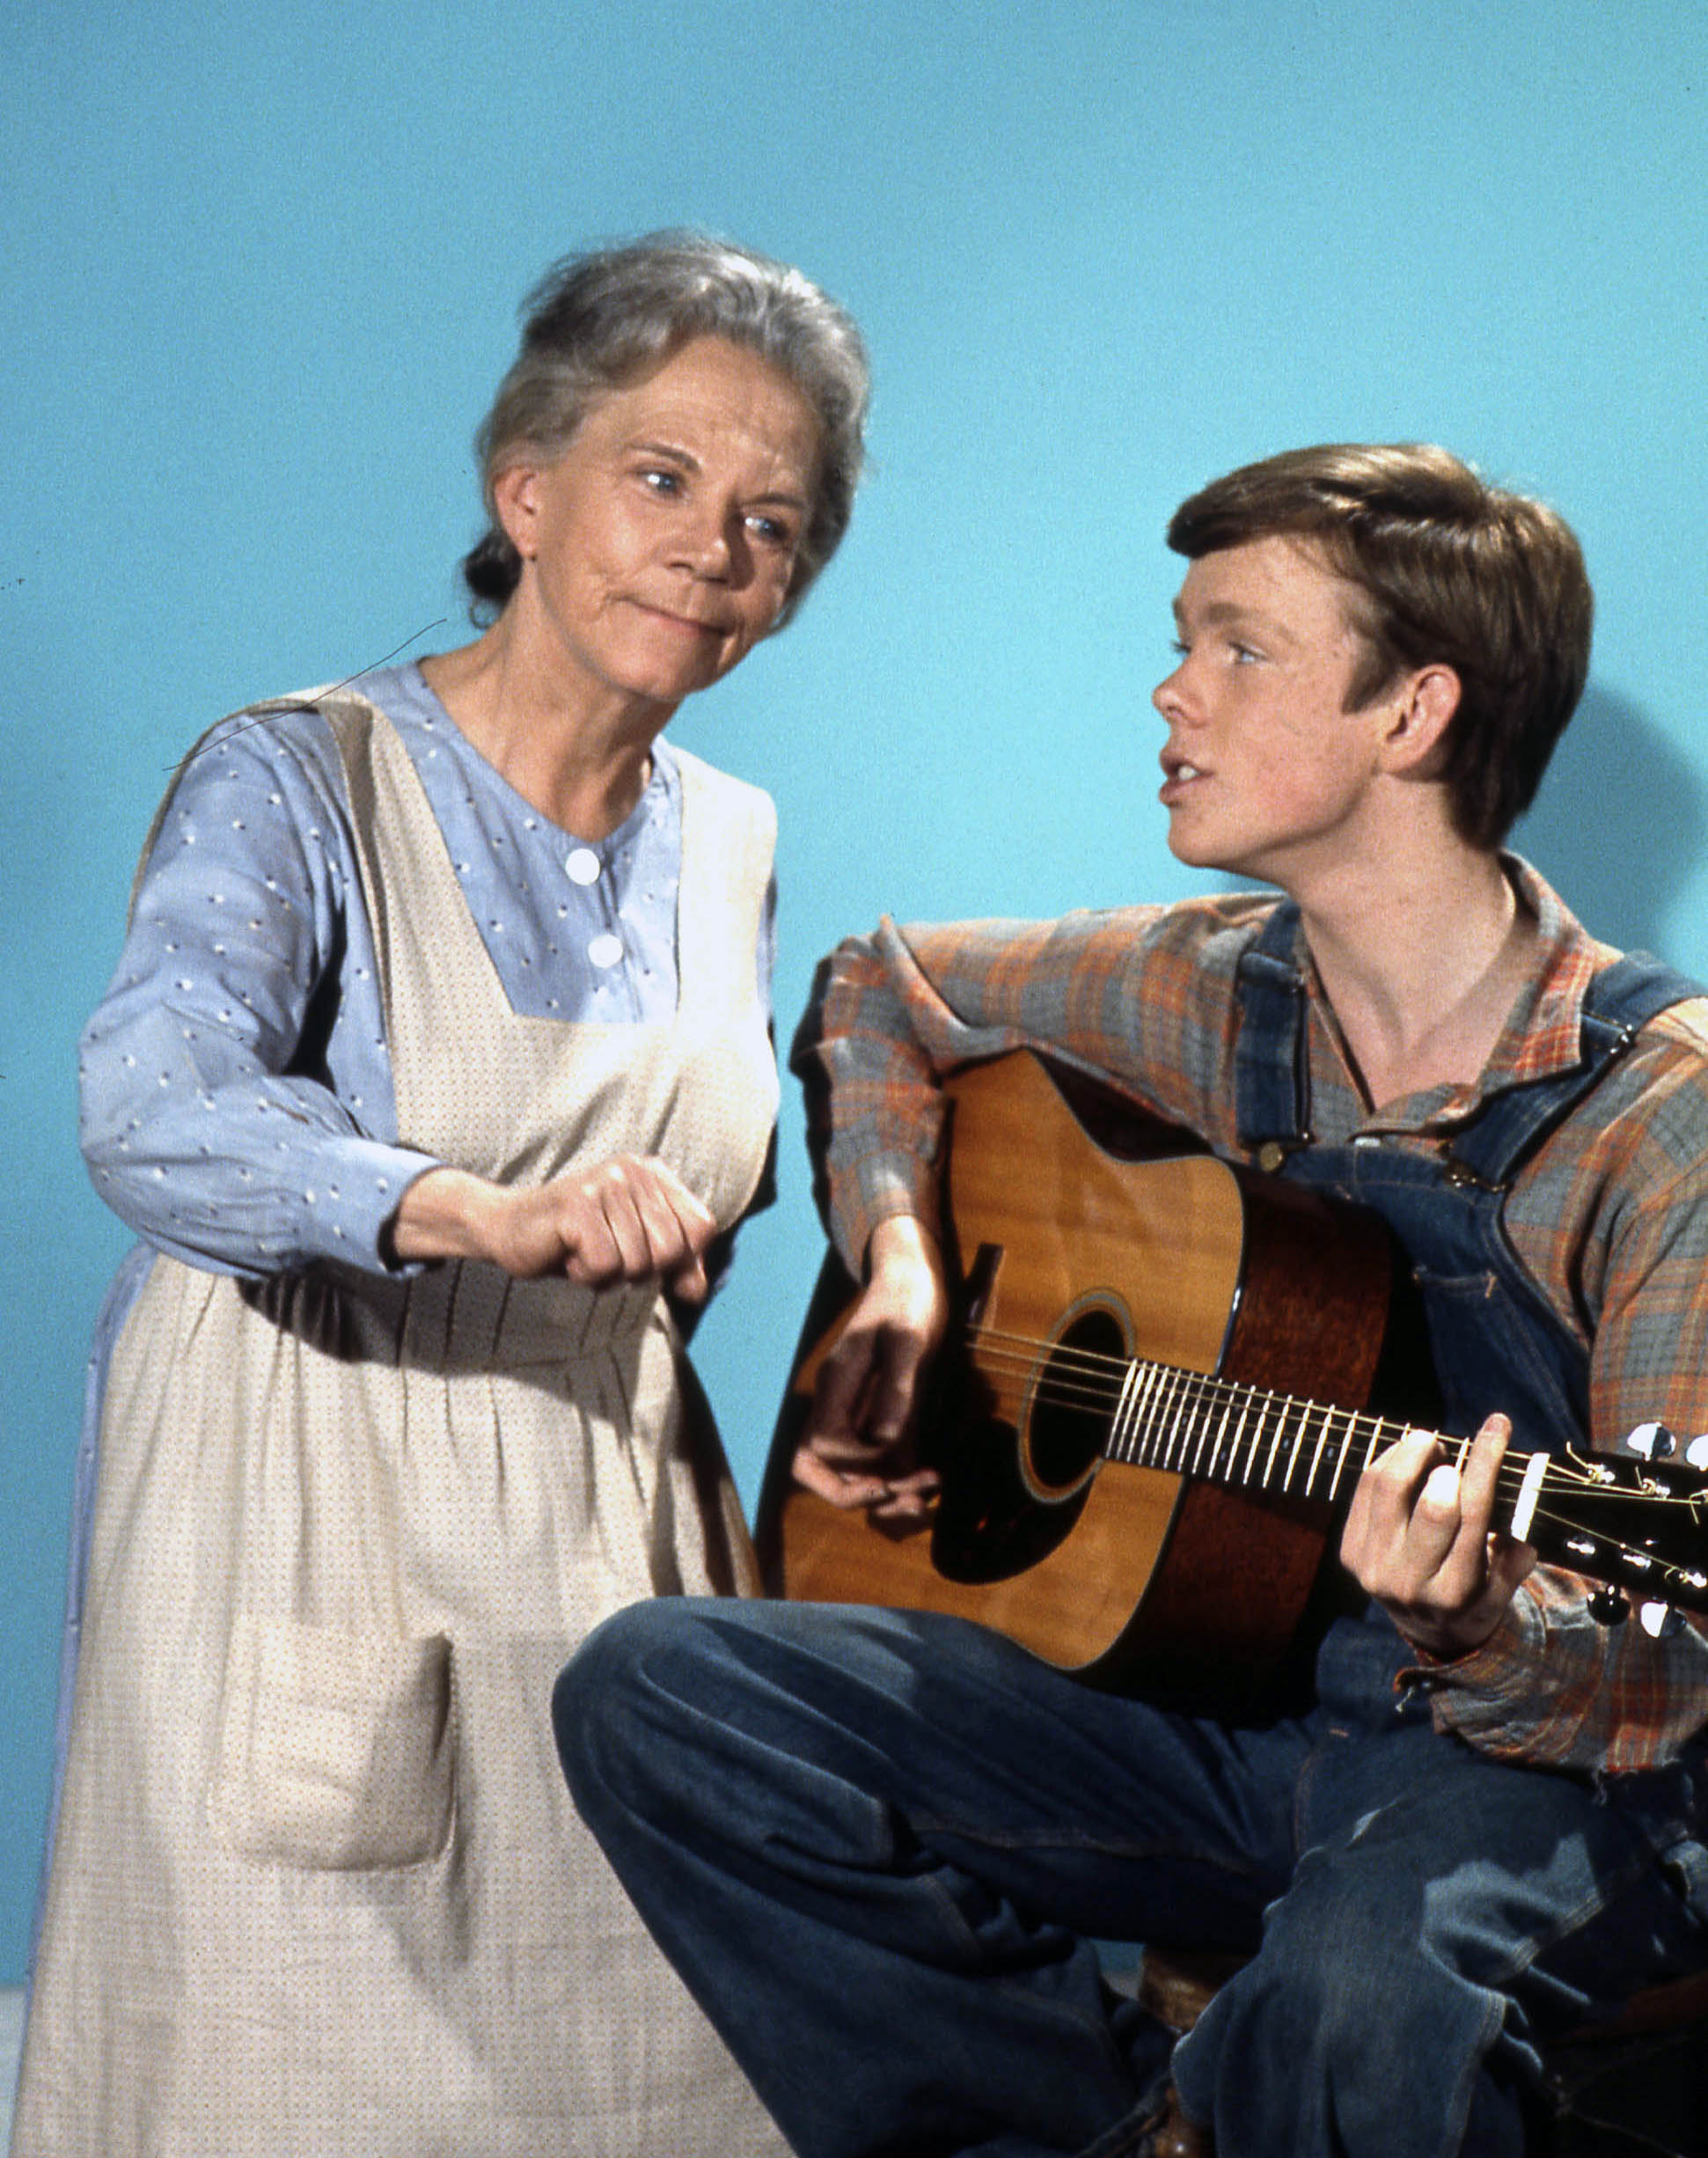 Ellen Corby as Esther Walton and Jon Walmsley as Jason Walton in the CBS television series, "The Waltons," circa 1977. | Source: Getty Images